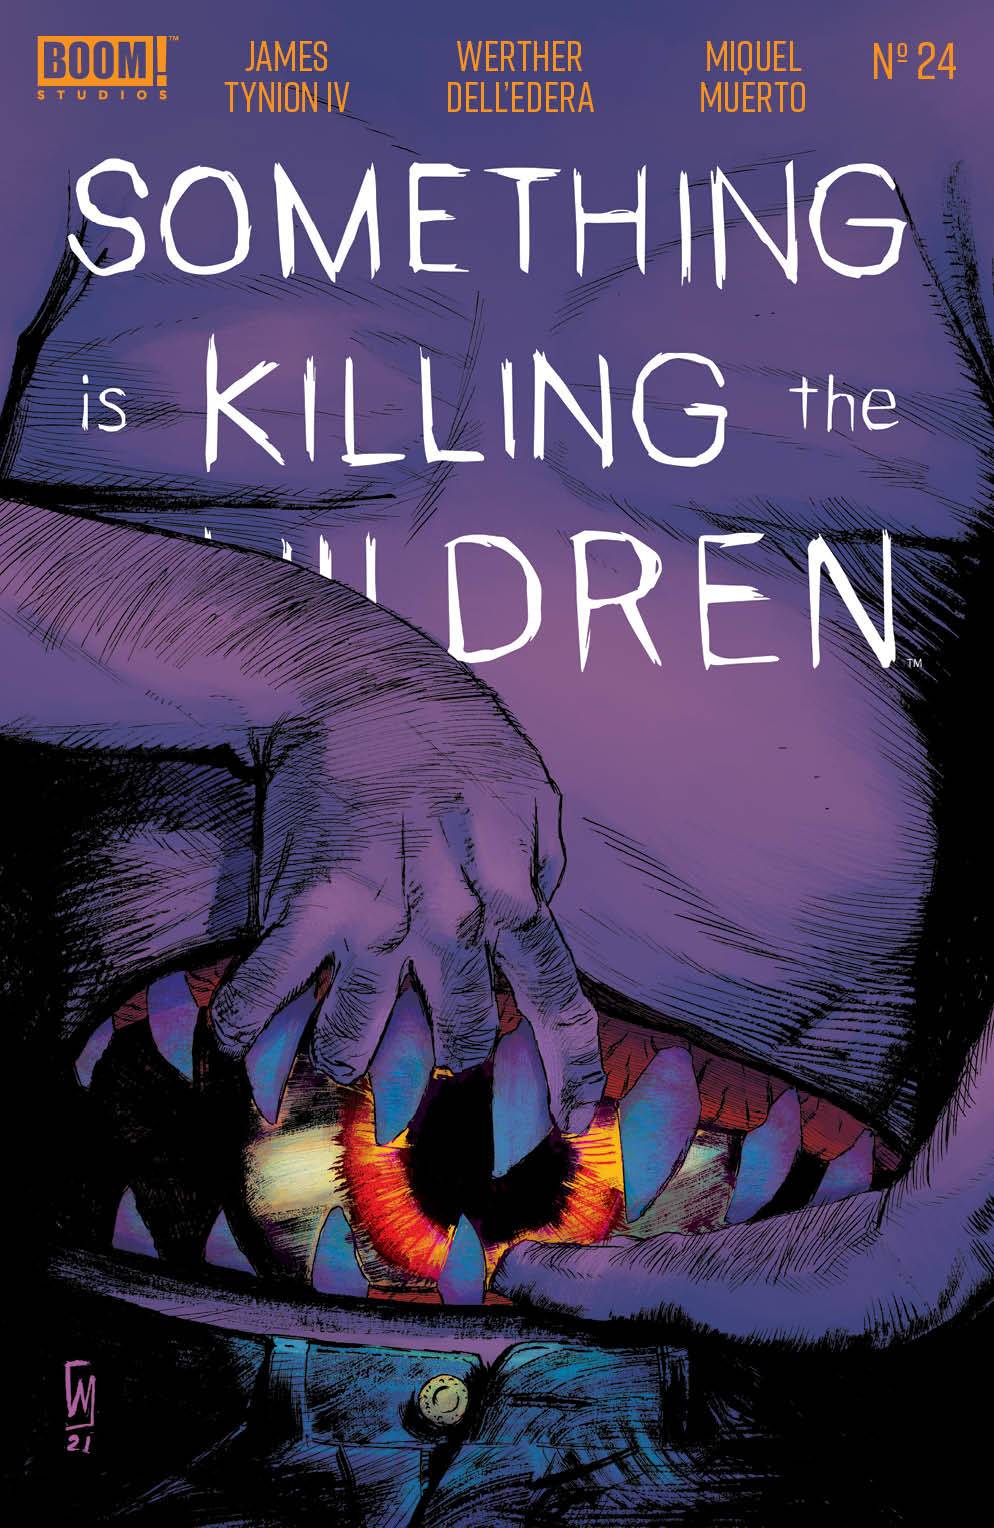 SOMETHING IS KILLING THE CHILDREN #24 COVER A DELL EDERA - Third Eye